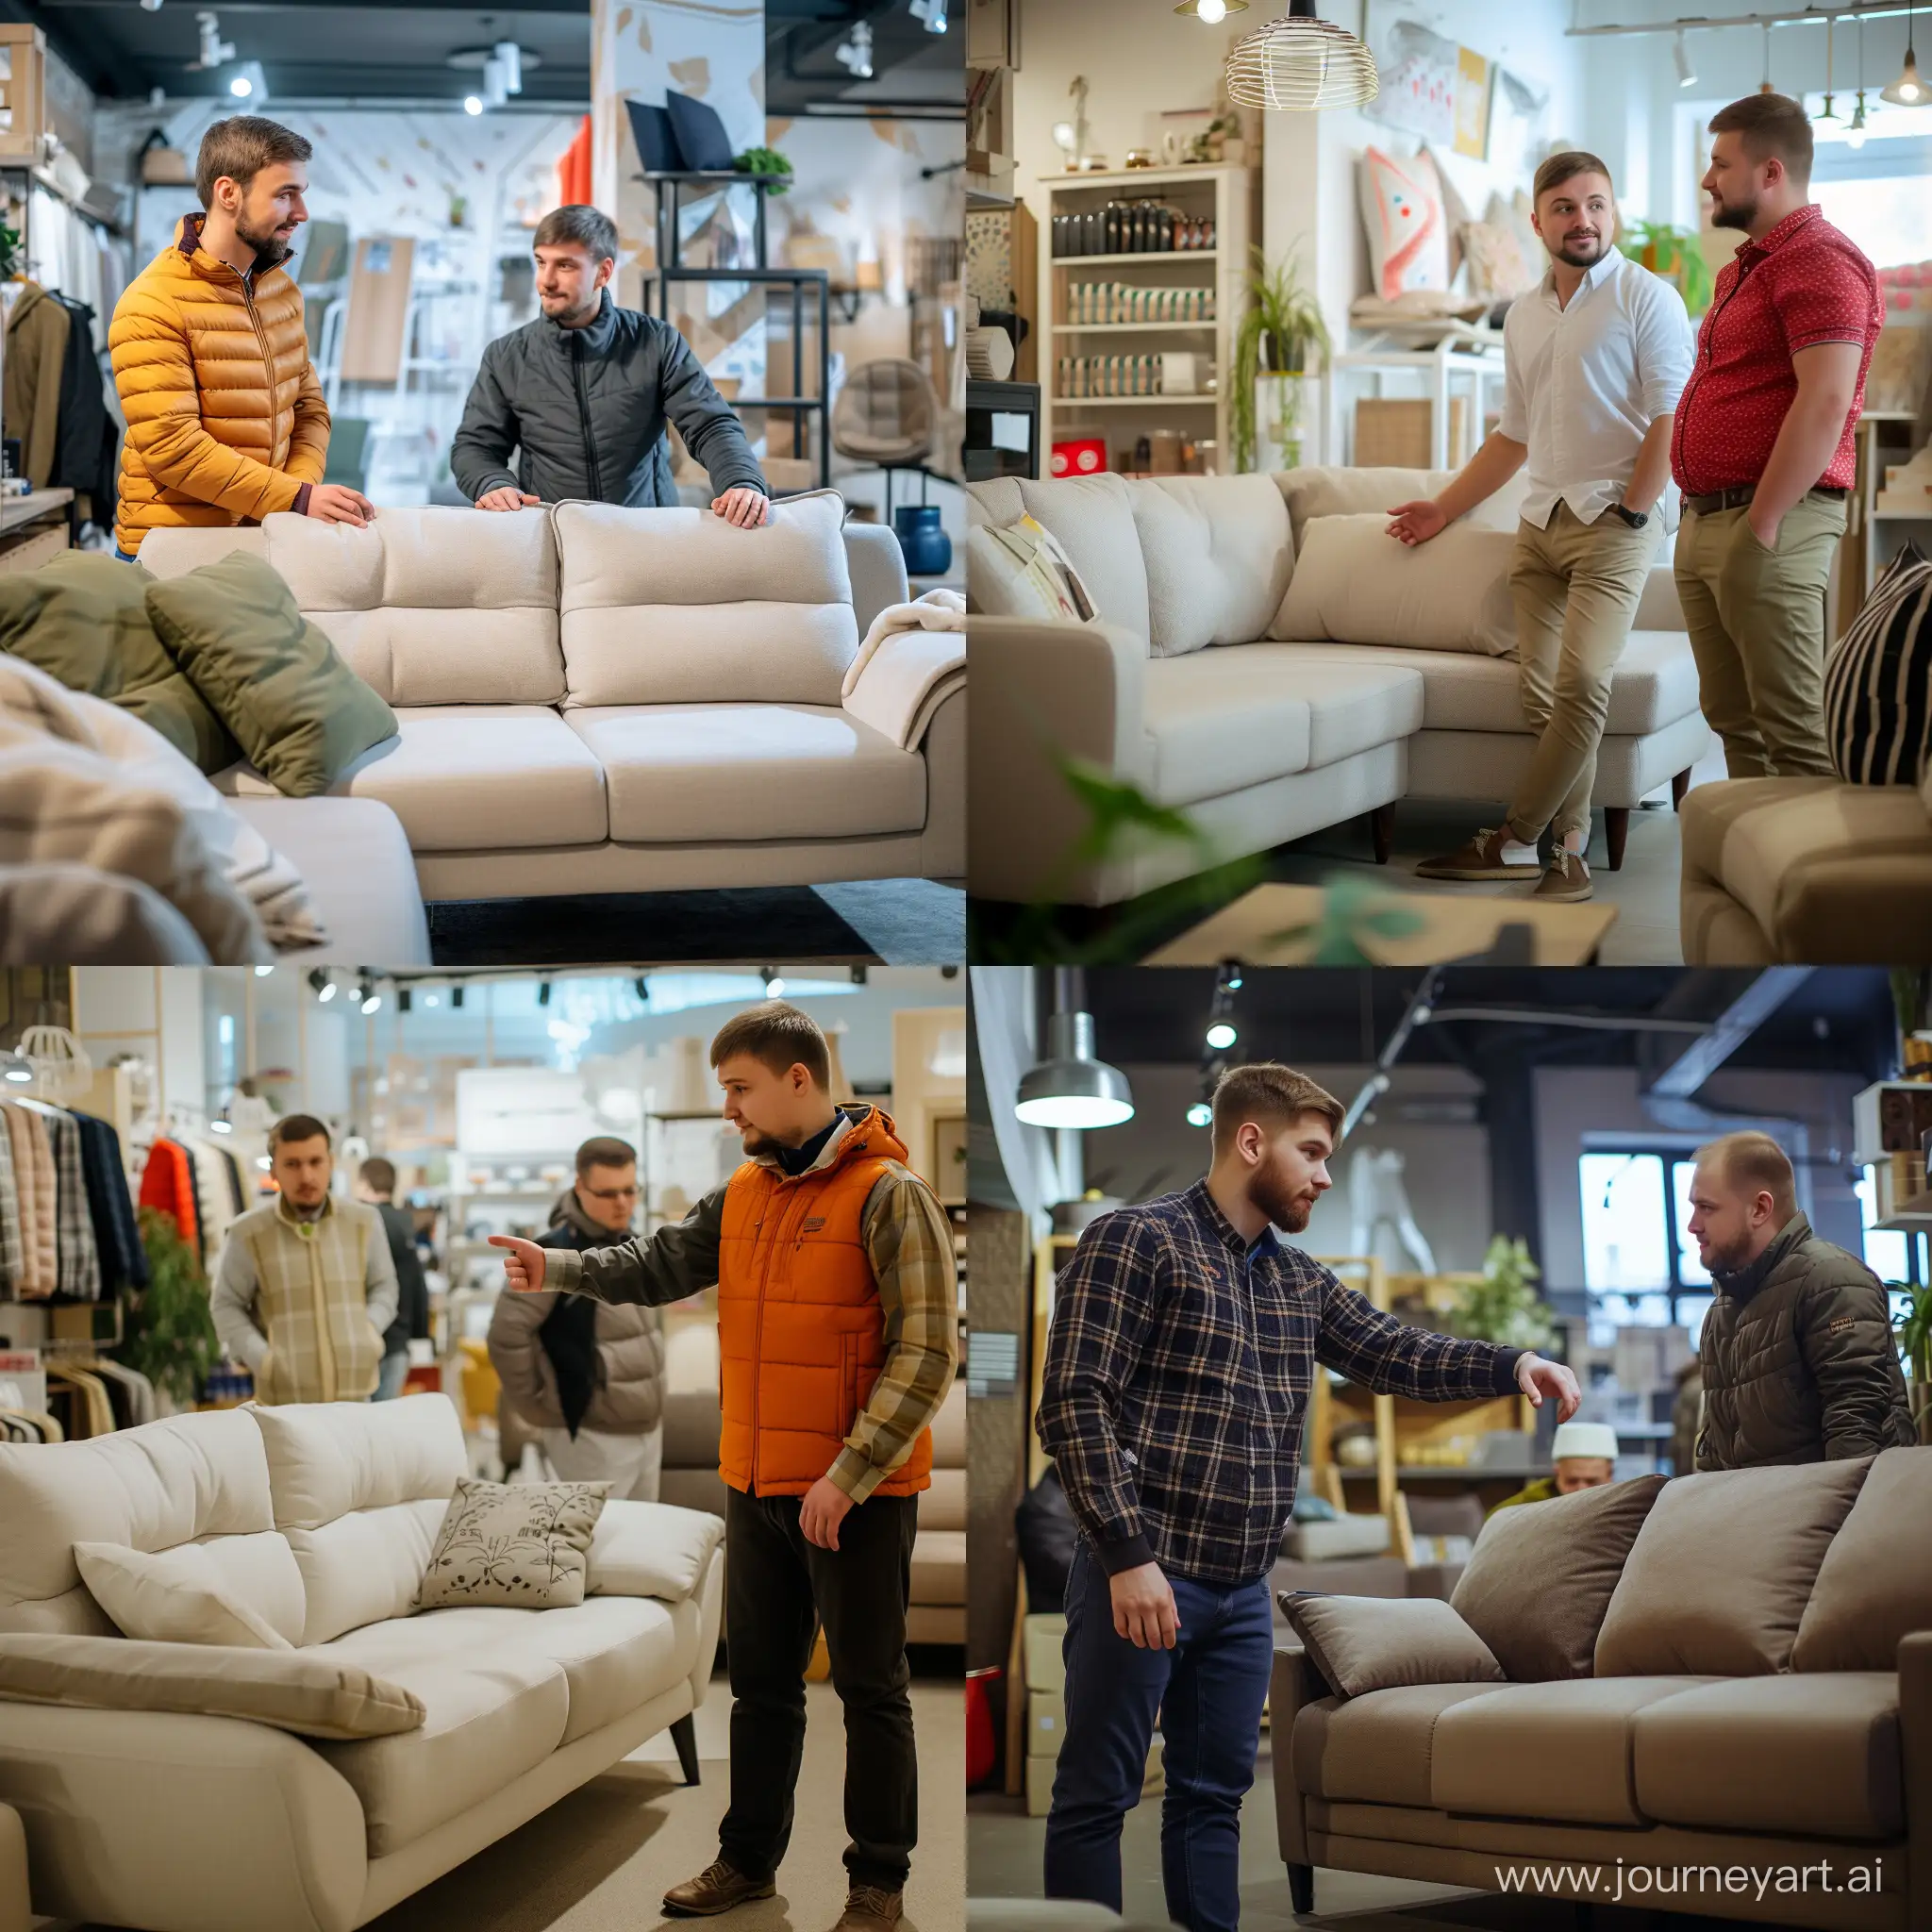 An attractive 27-year-old salesman from Belarus is selling a sofa to a 40-year-old man from Russia in his own furniture store, ultra HD bright atmosphere, original photo, high detail, very sharp, 18mm lens, realistic, photography, Leica camera